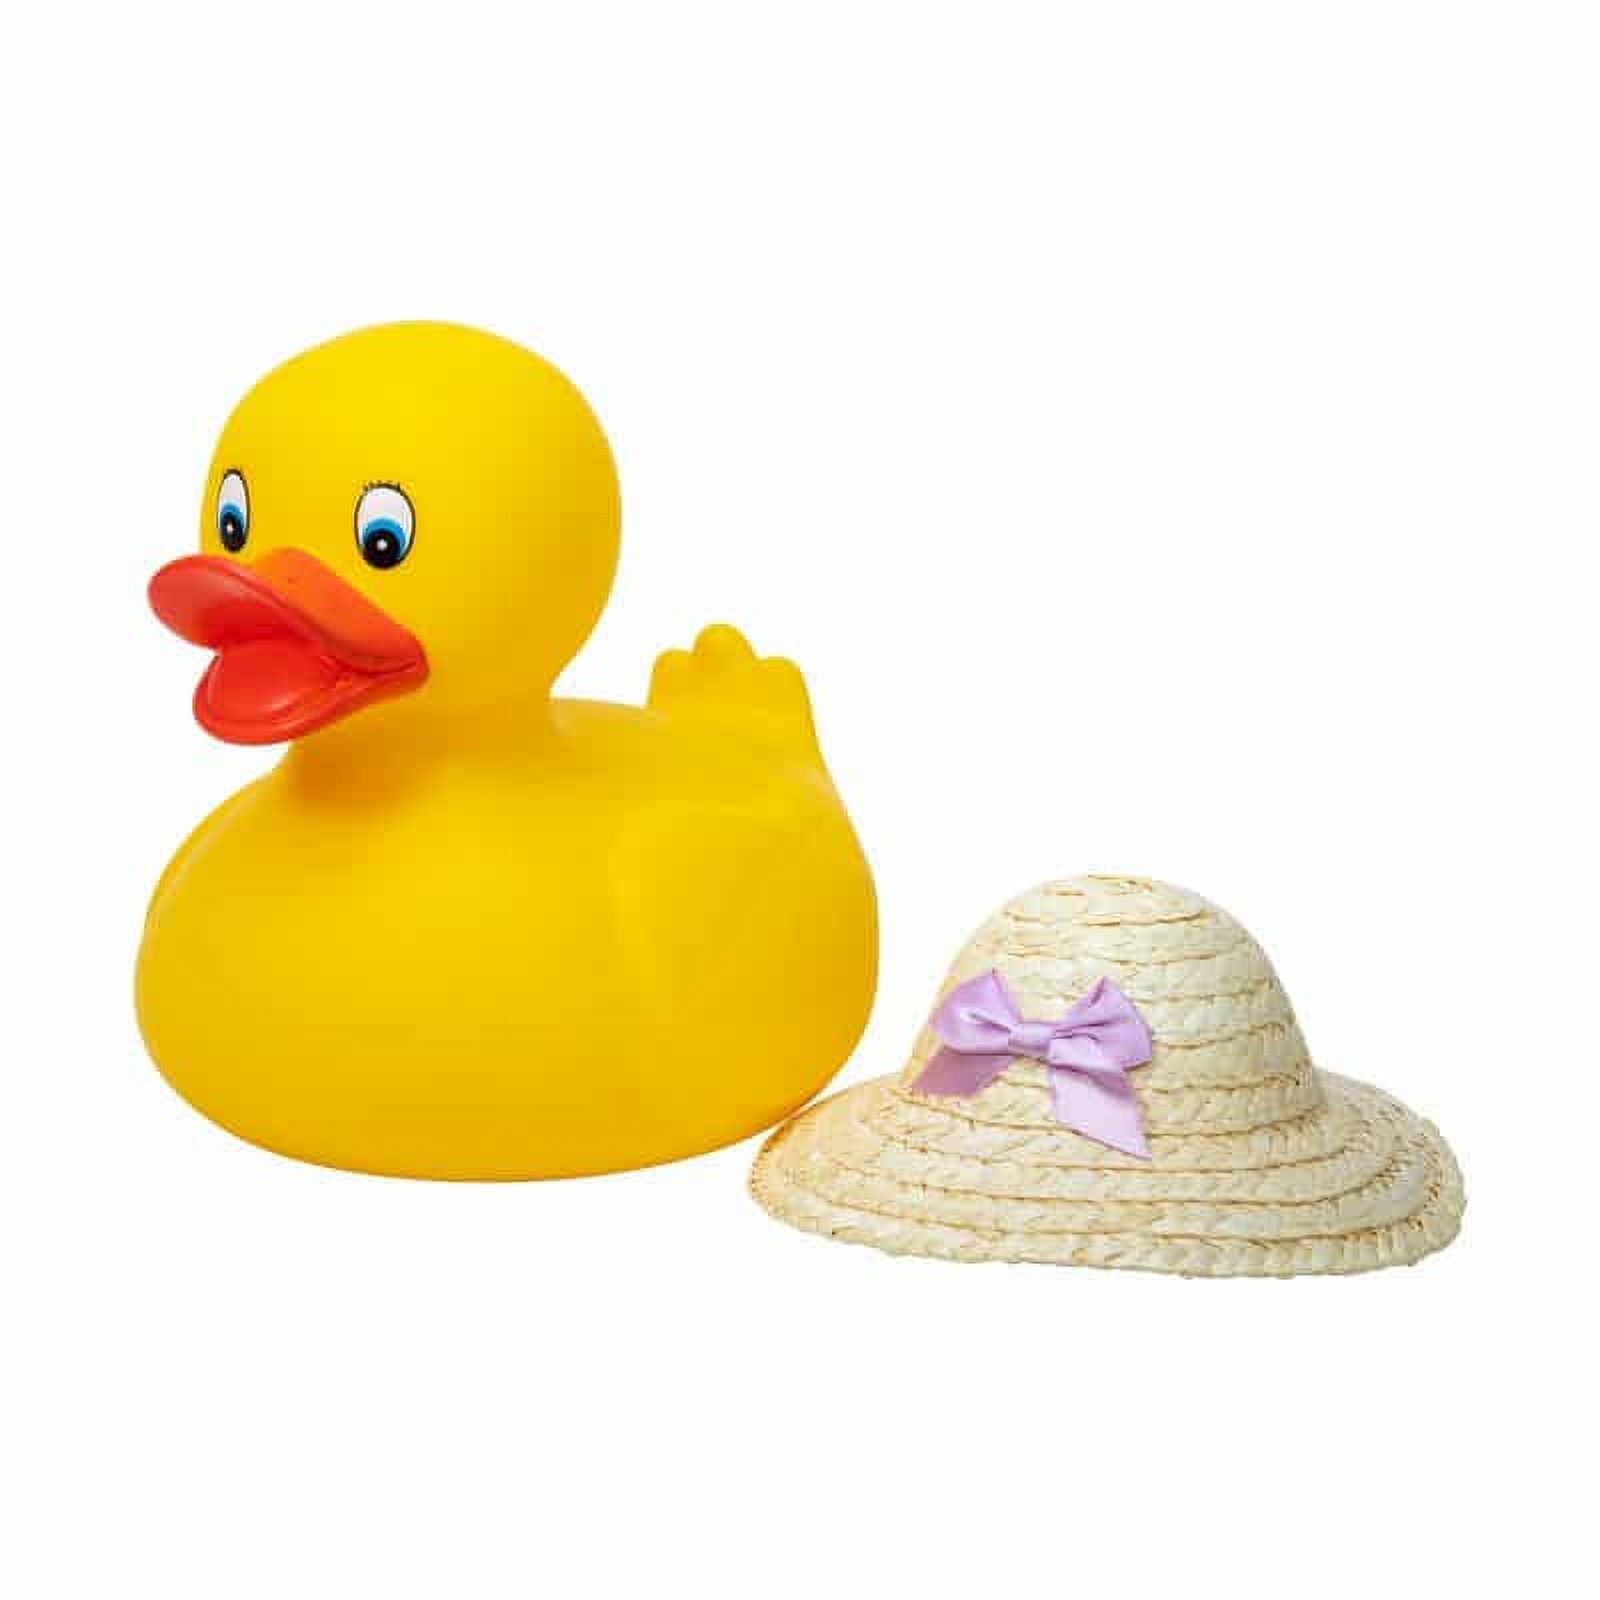 Schylling Large Classic Yellow Rubber Ducky (10in tall, styles vary) - image 4 of 7